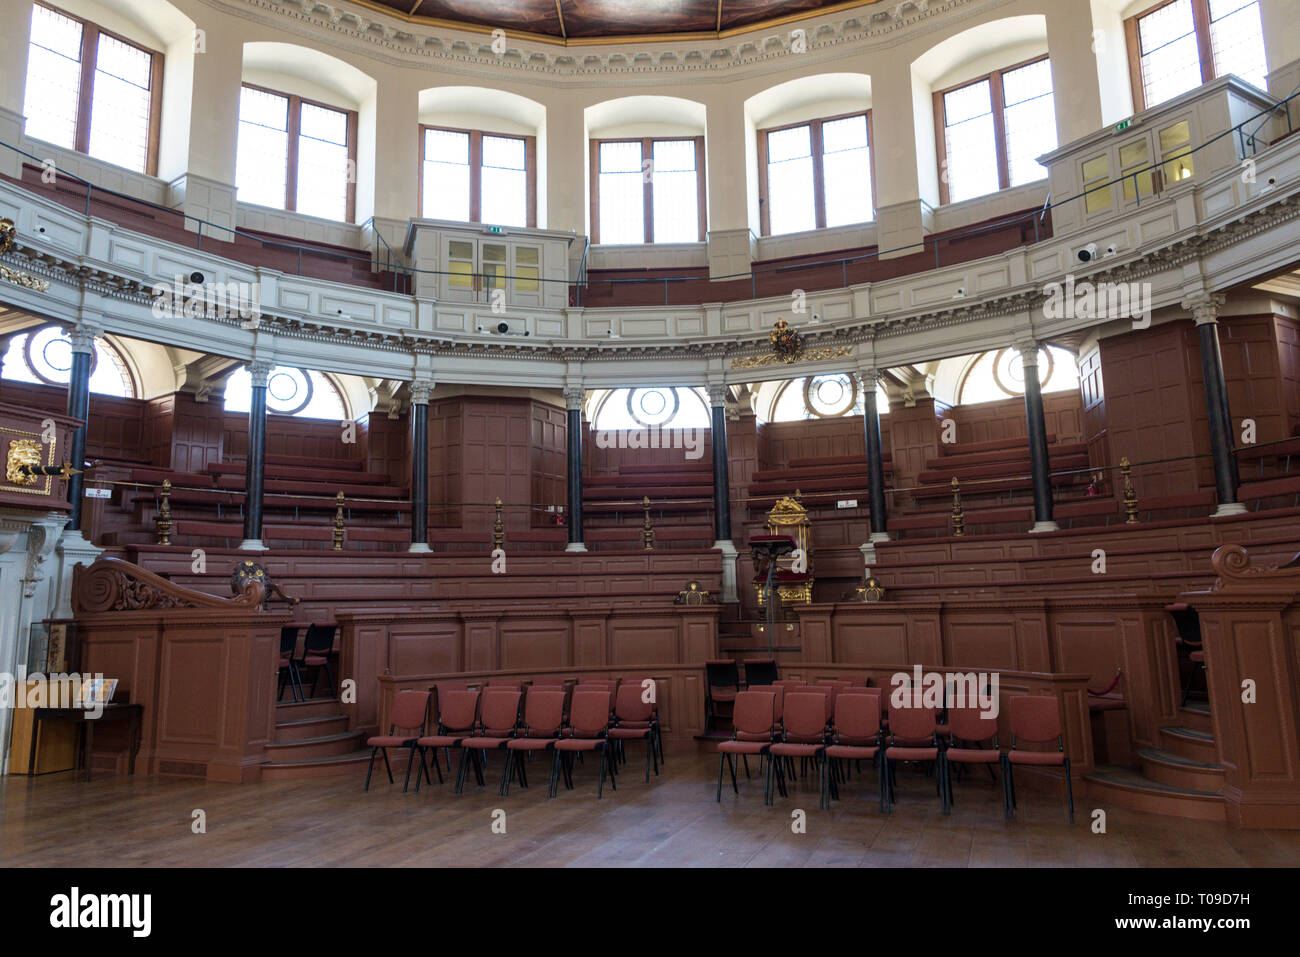 Main hall inside  the Sheldonian Theatre in Oxford, Oxfordshire, Britain.  The theatre is the official ceremonial hall of the University of Oxford.inc Stock Photo